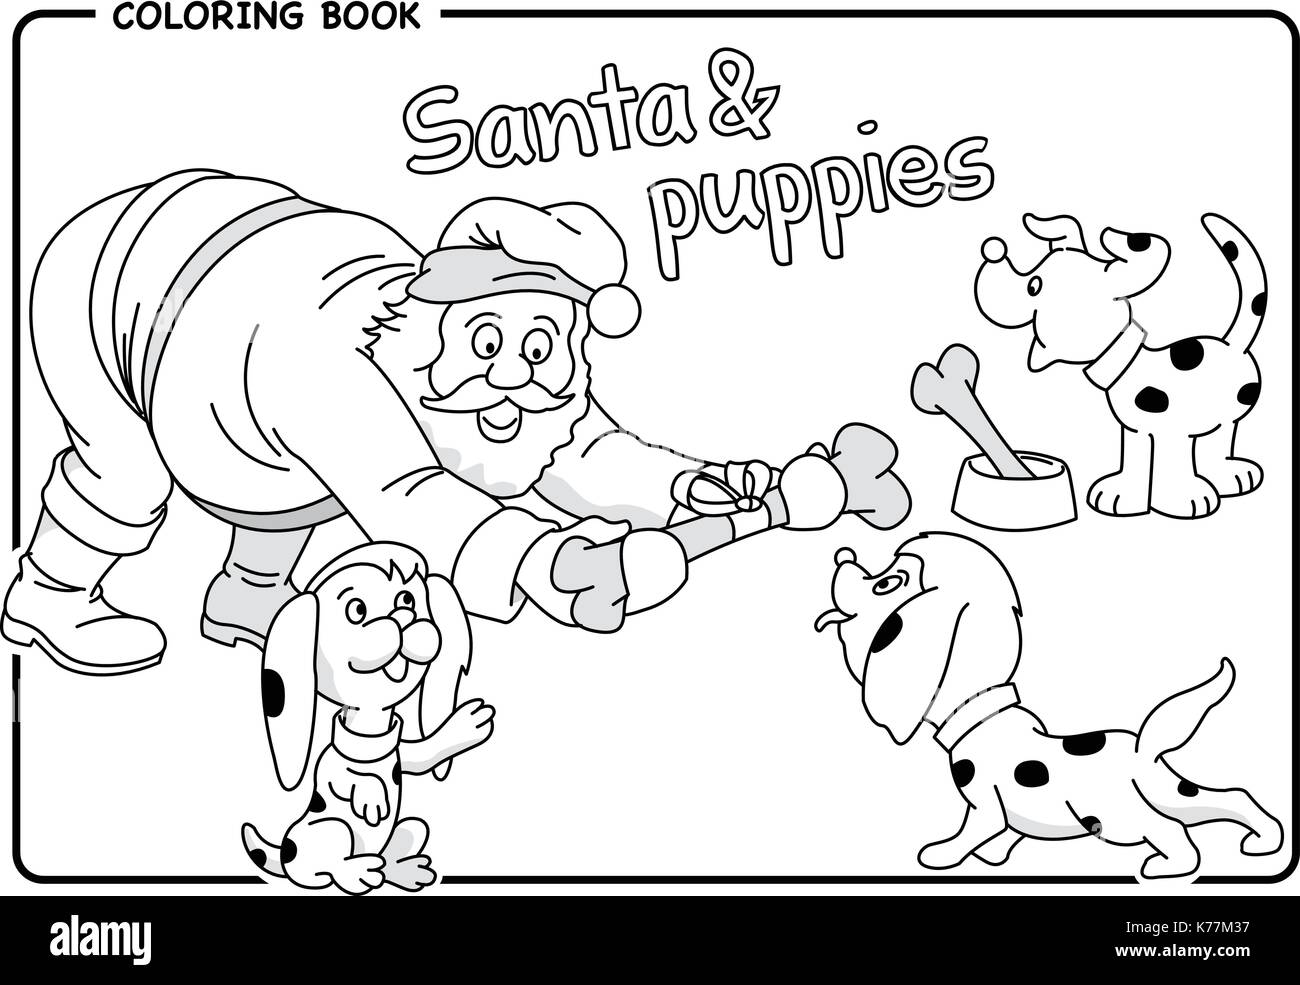 Santa gives a bone to puppies in Christmas - Coloring draw. Vector image Stock Vector